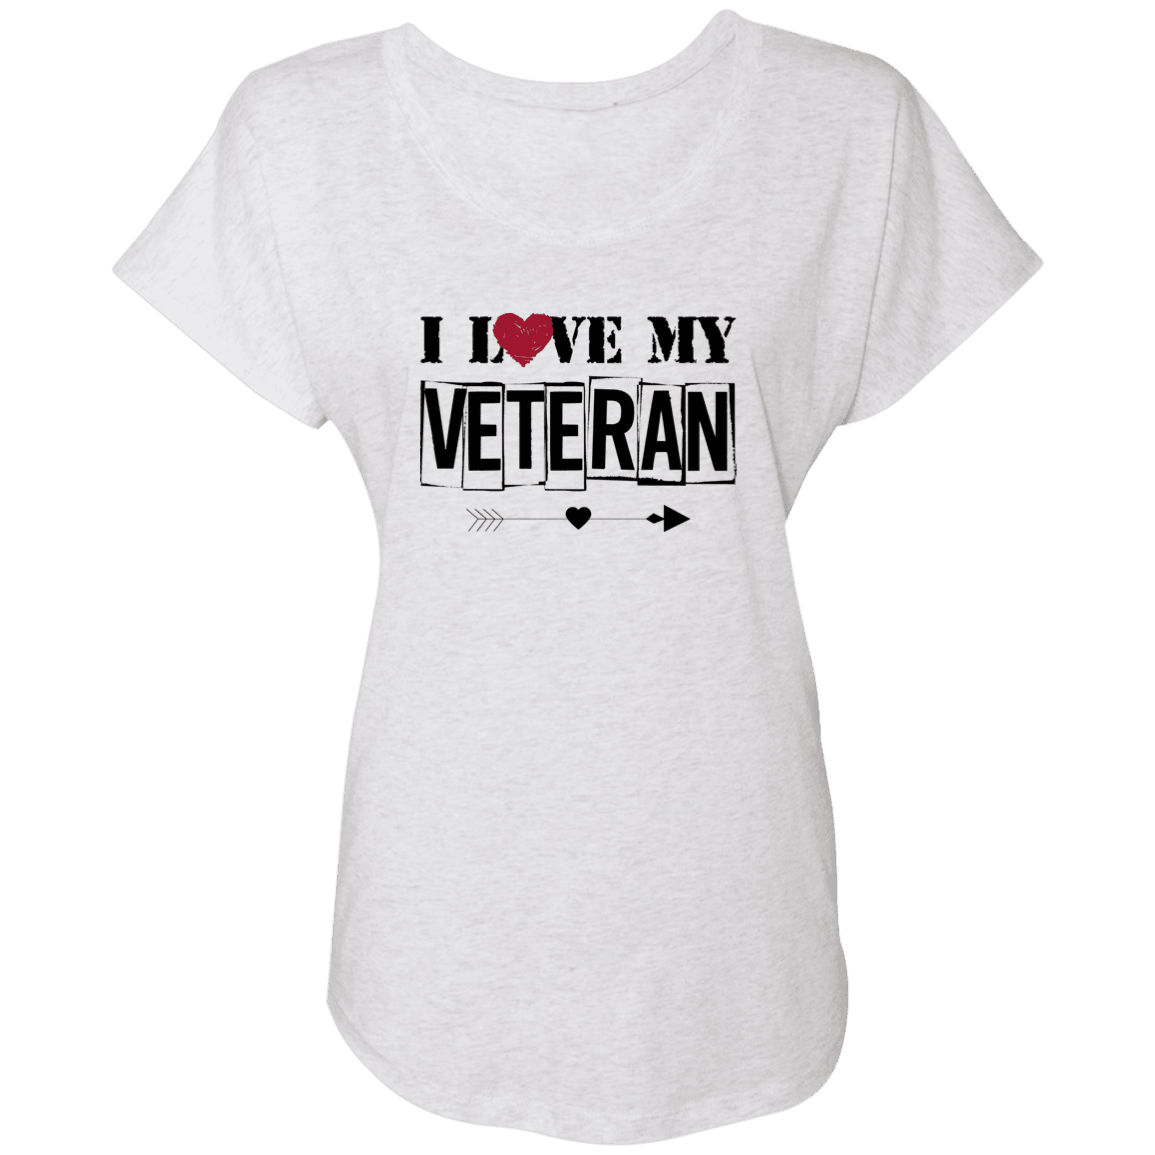 Designs by MyUtopia Shout Out:I Love My Veteran Ladies' Triblend Dolman Shirt,X-Small / Heather White,Ladies T-Shirts